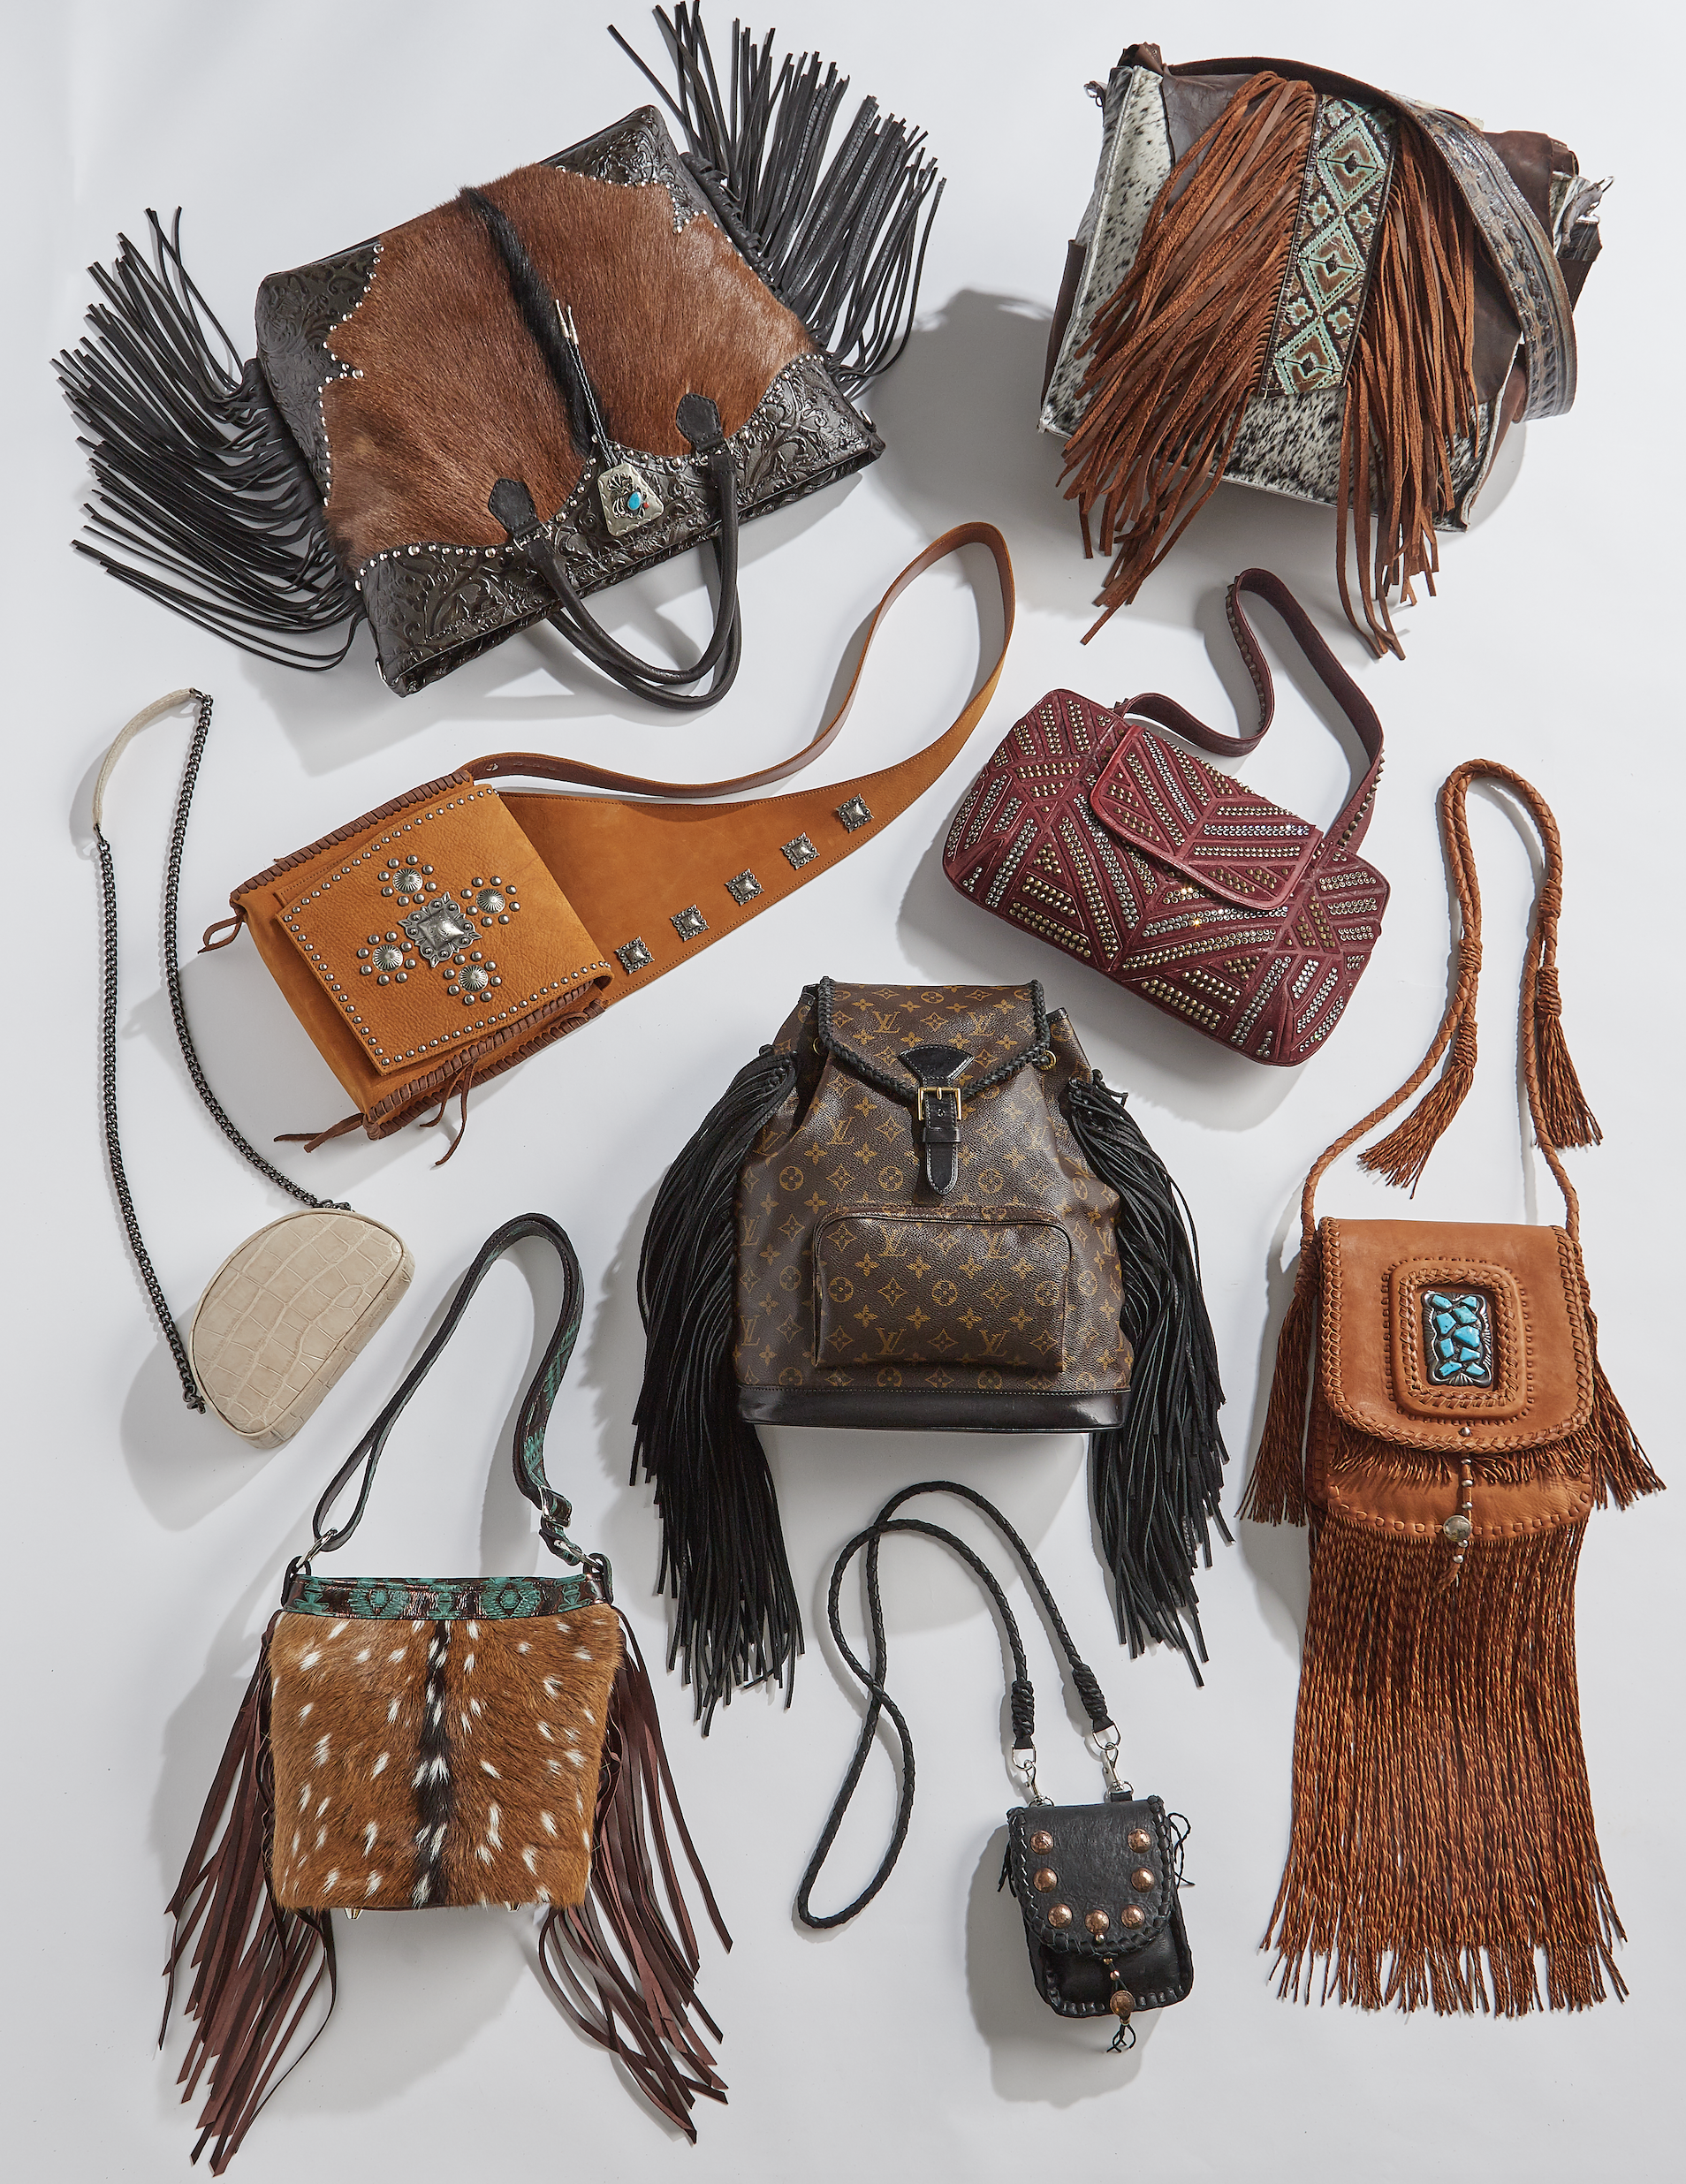 On The Horizon: Rustic Neutral Toned Handbags - Cowboys and Indians Magazine